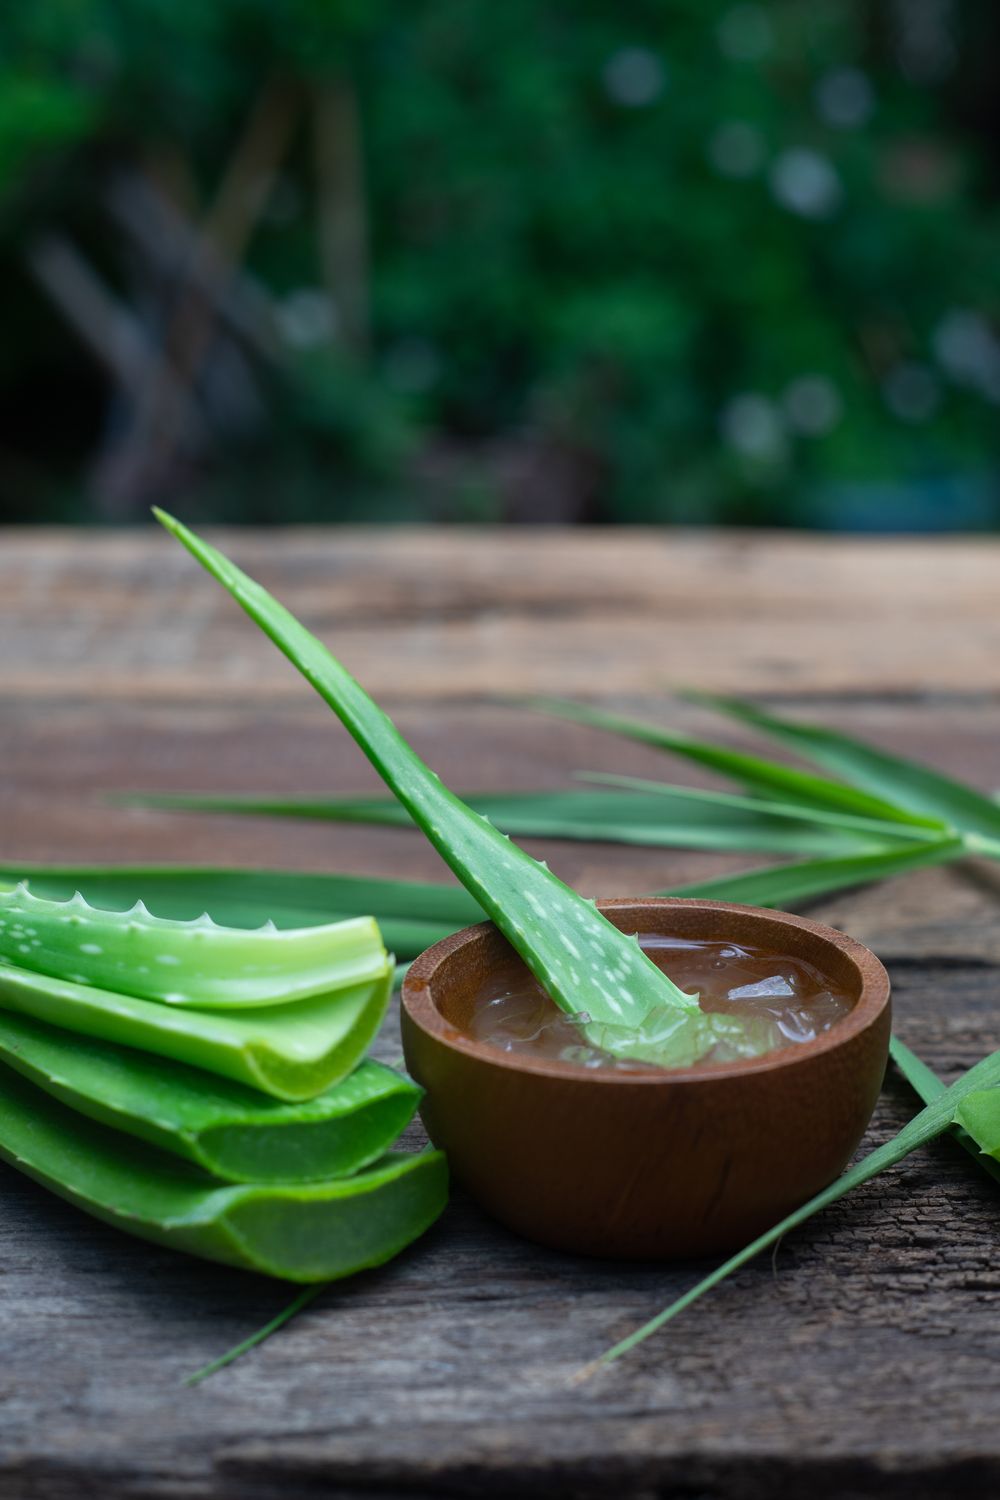 Aloe Vera is the King of Home Remedies